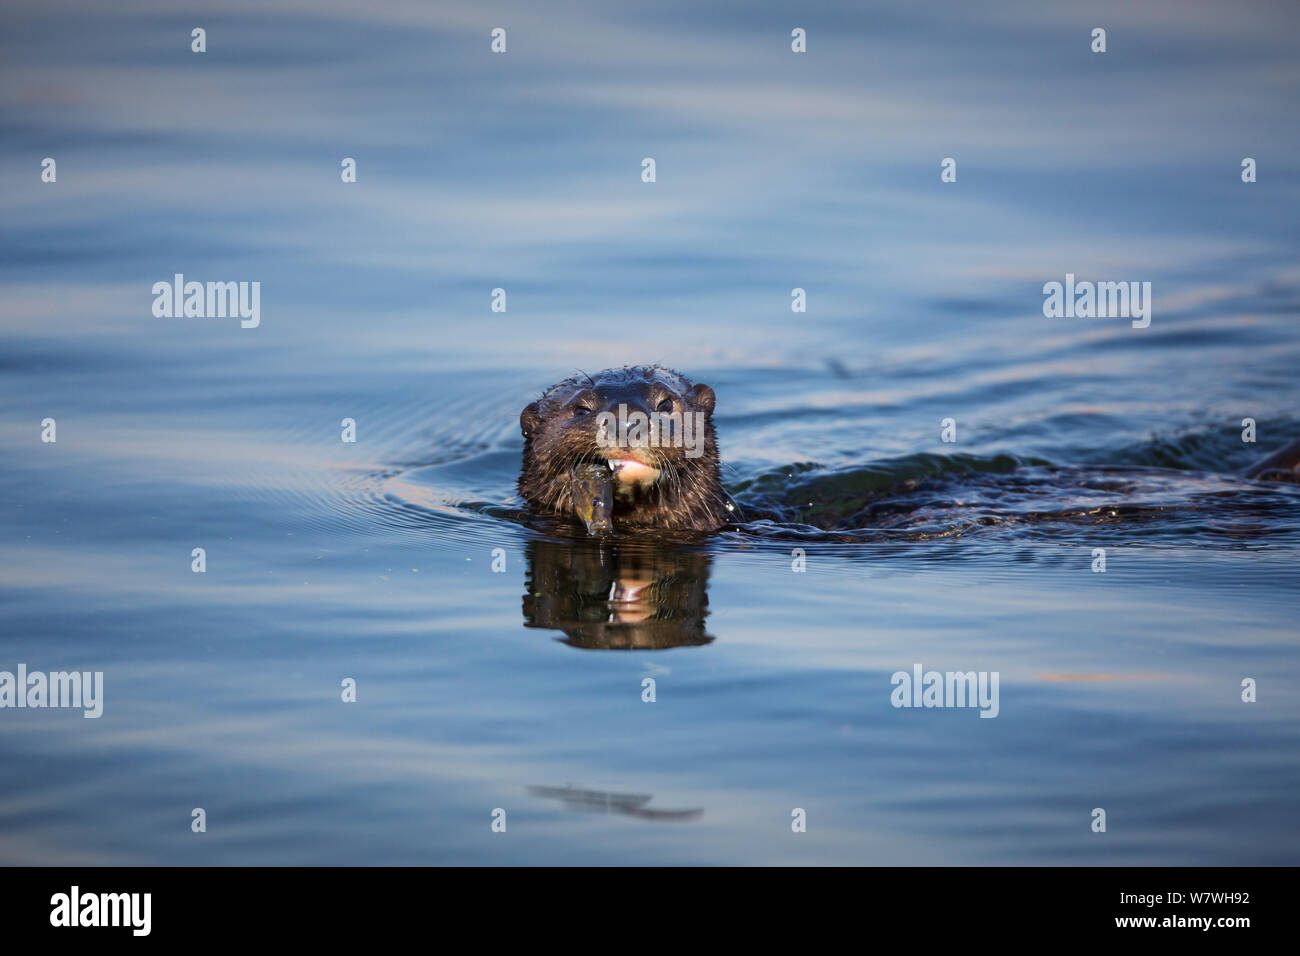 Spotted-necked Otter (Lutra maculicollis) feeding on fish, Marievale Bird Sanctuary, South Africa, July. Stock Photo